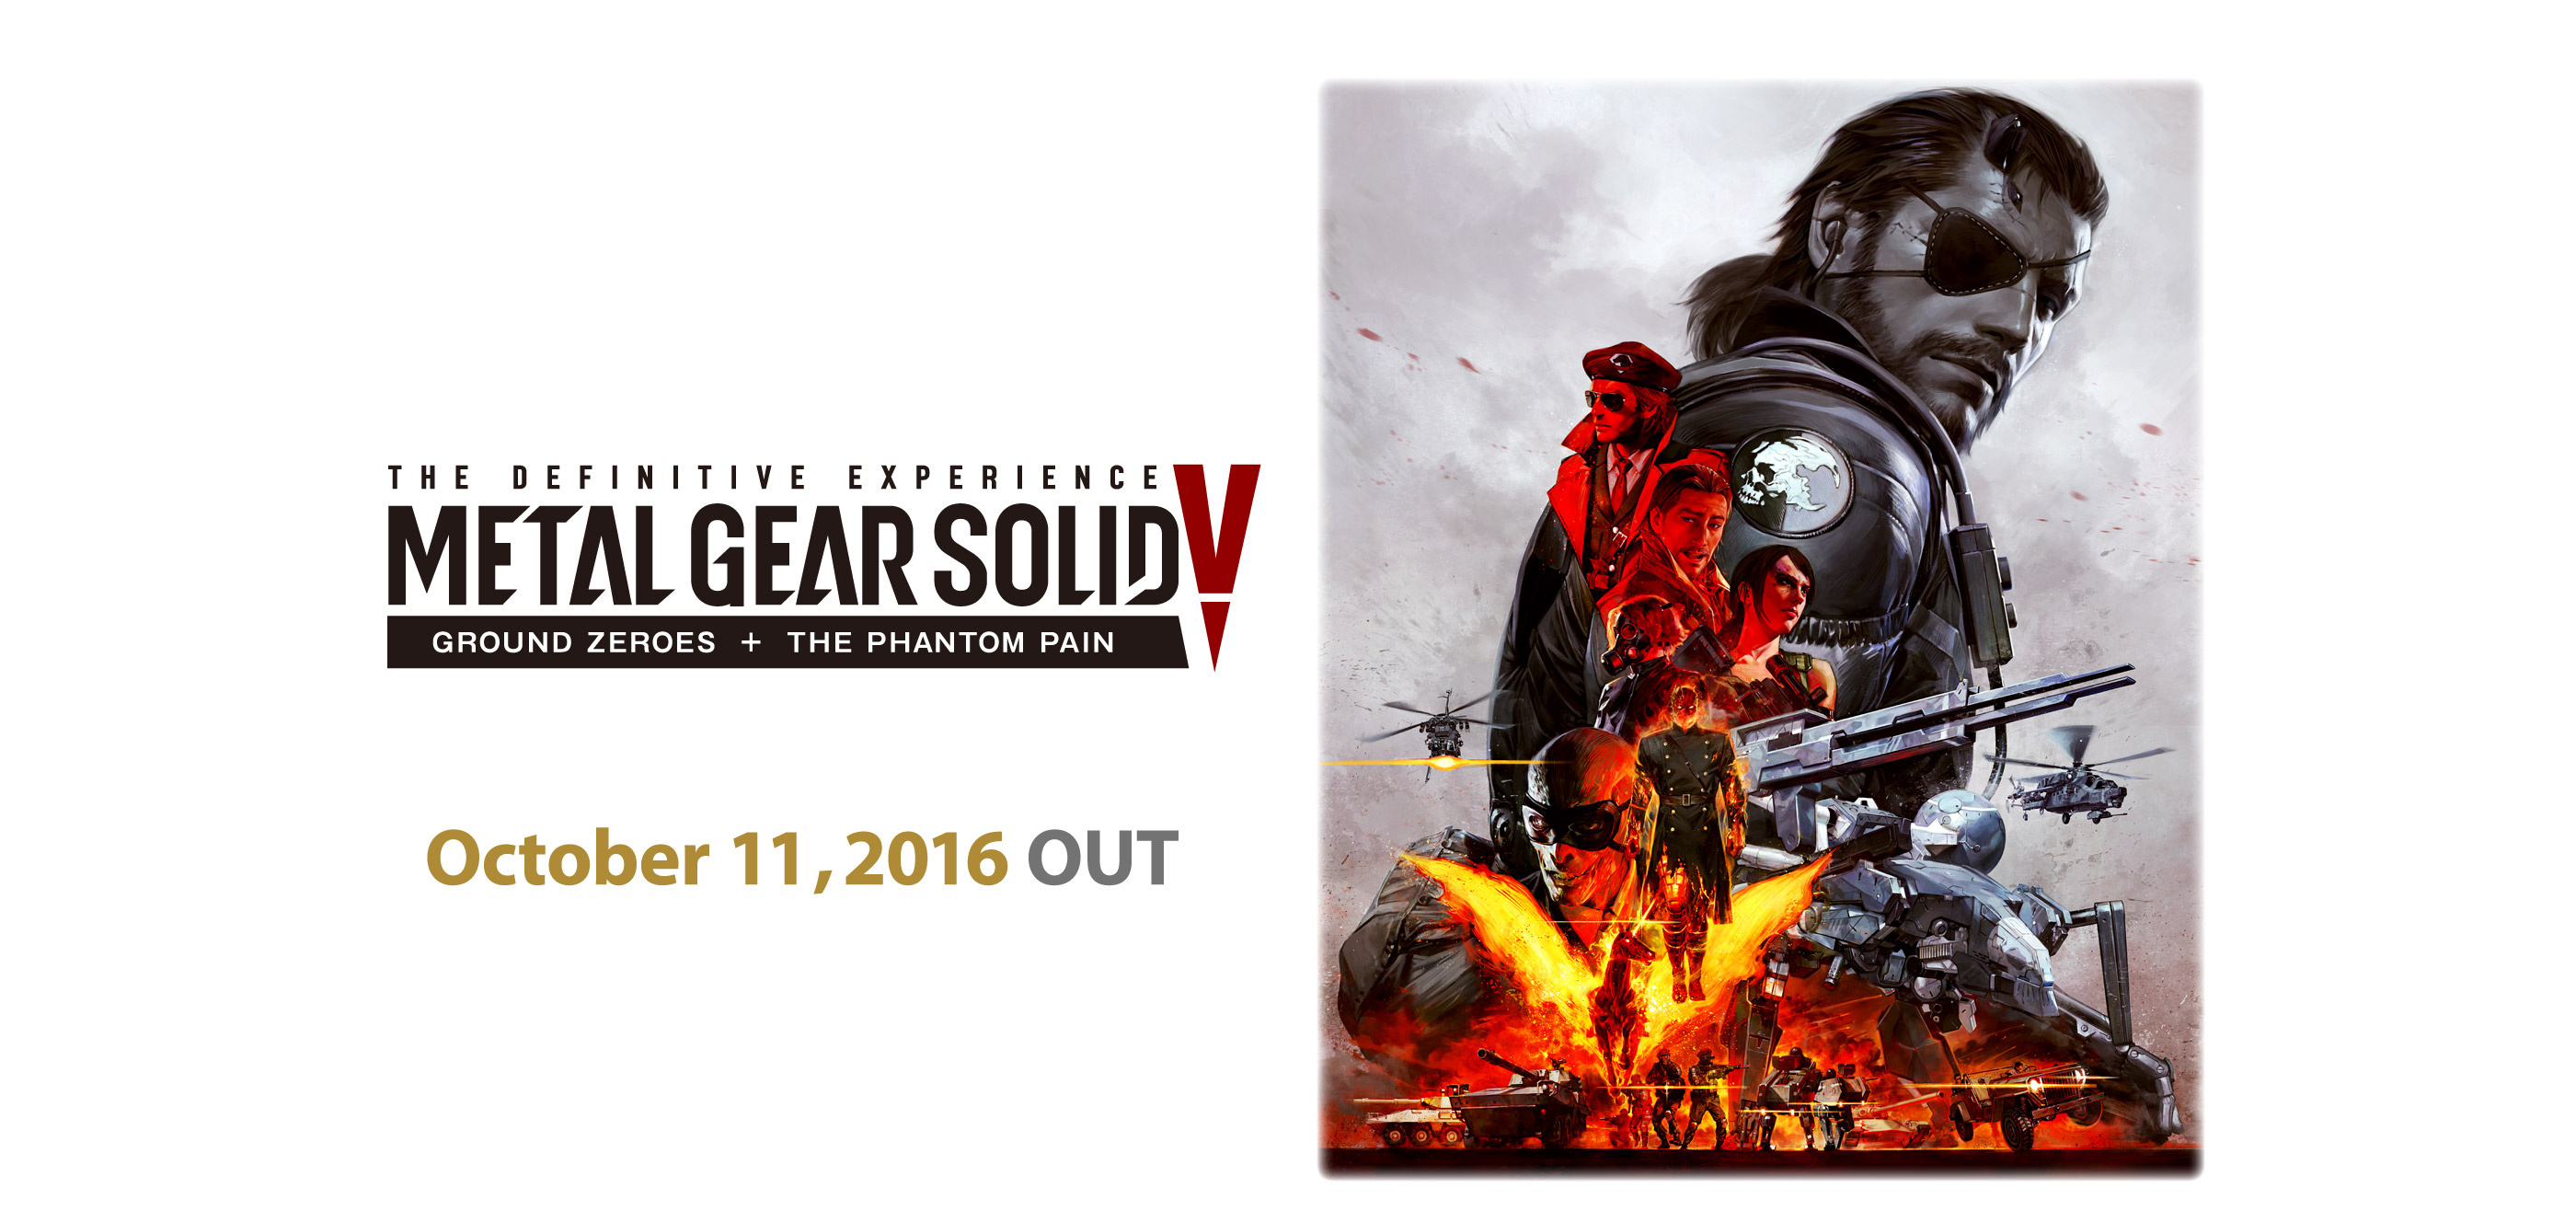 Metal Gear Solid 5: The Definitive Experience Officially 